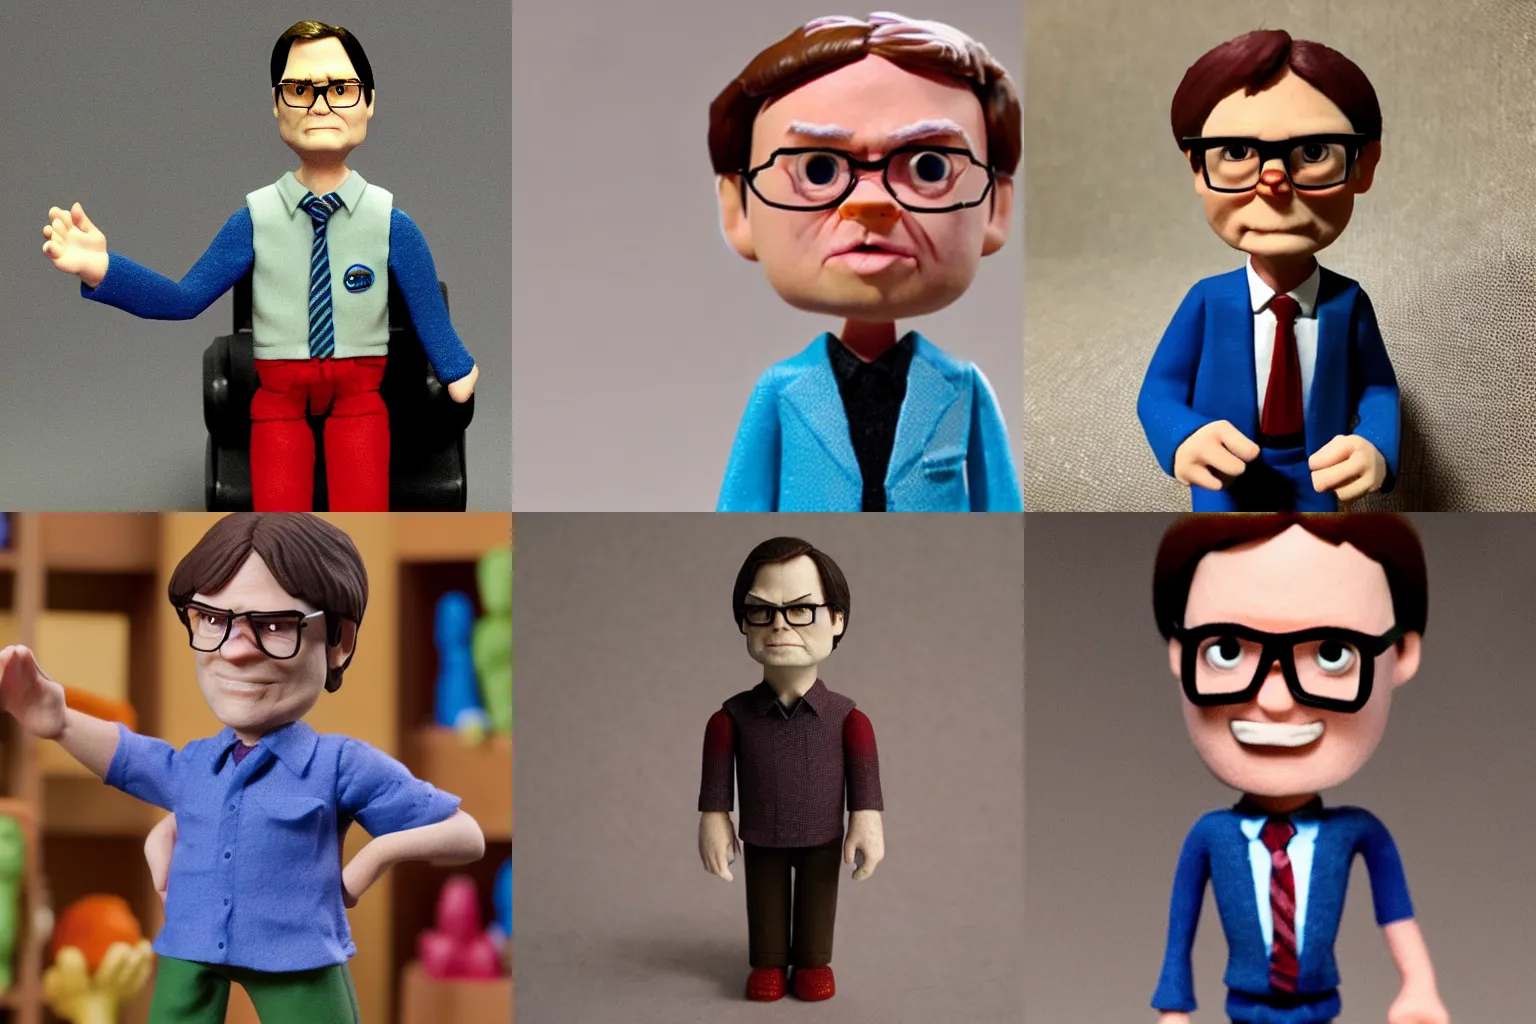 Prompt: claymation figure of Dwight Schrute